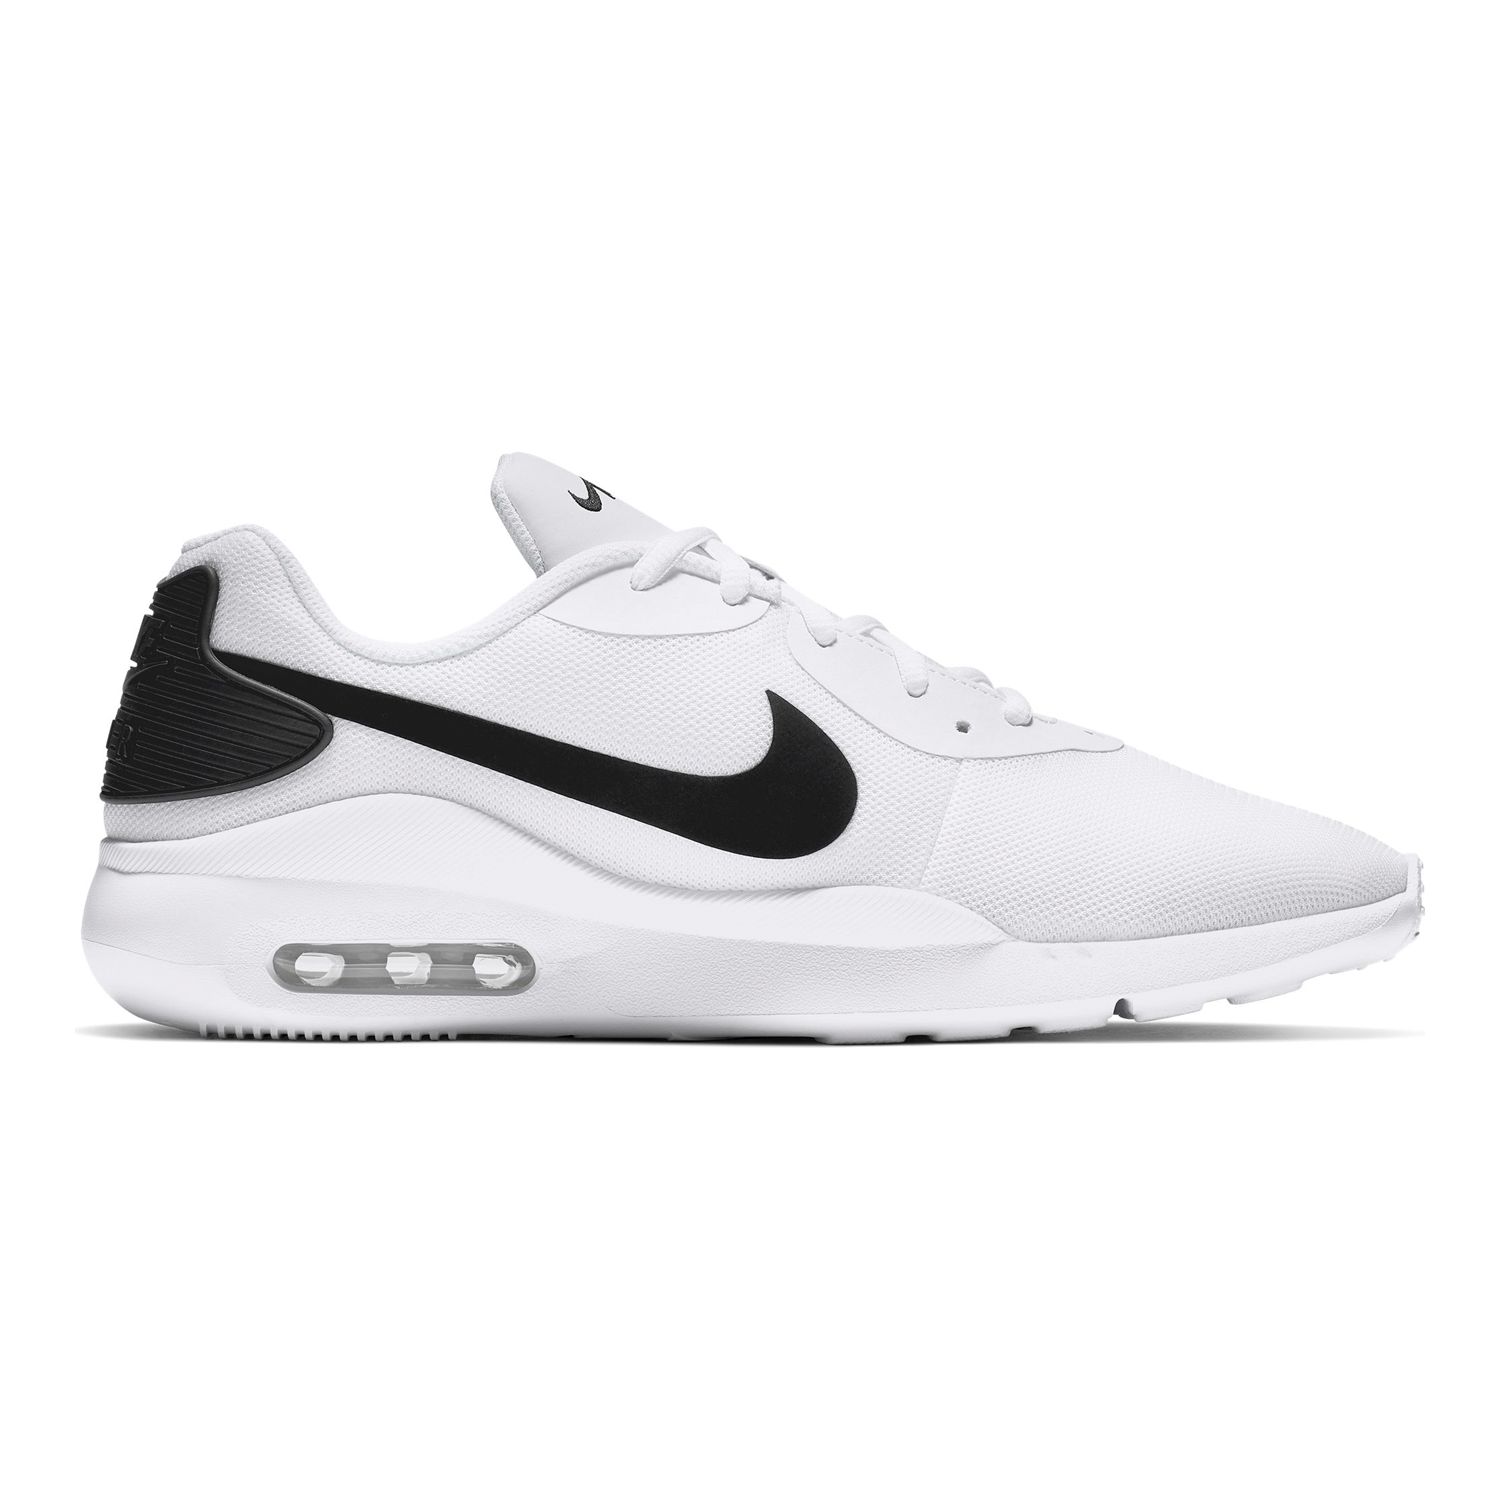 nike mens running shoes clearance